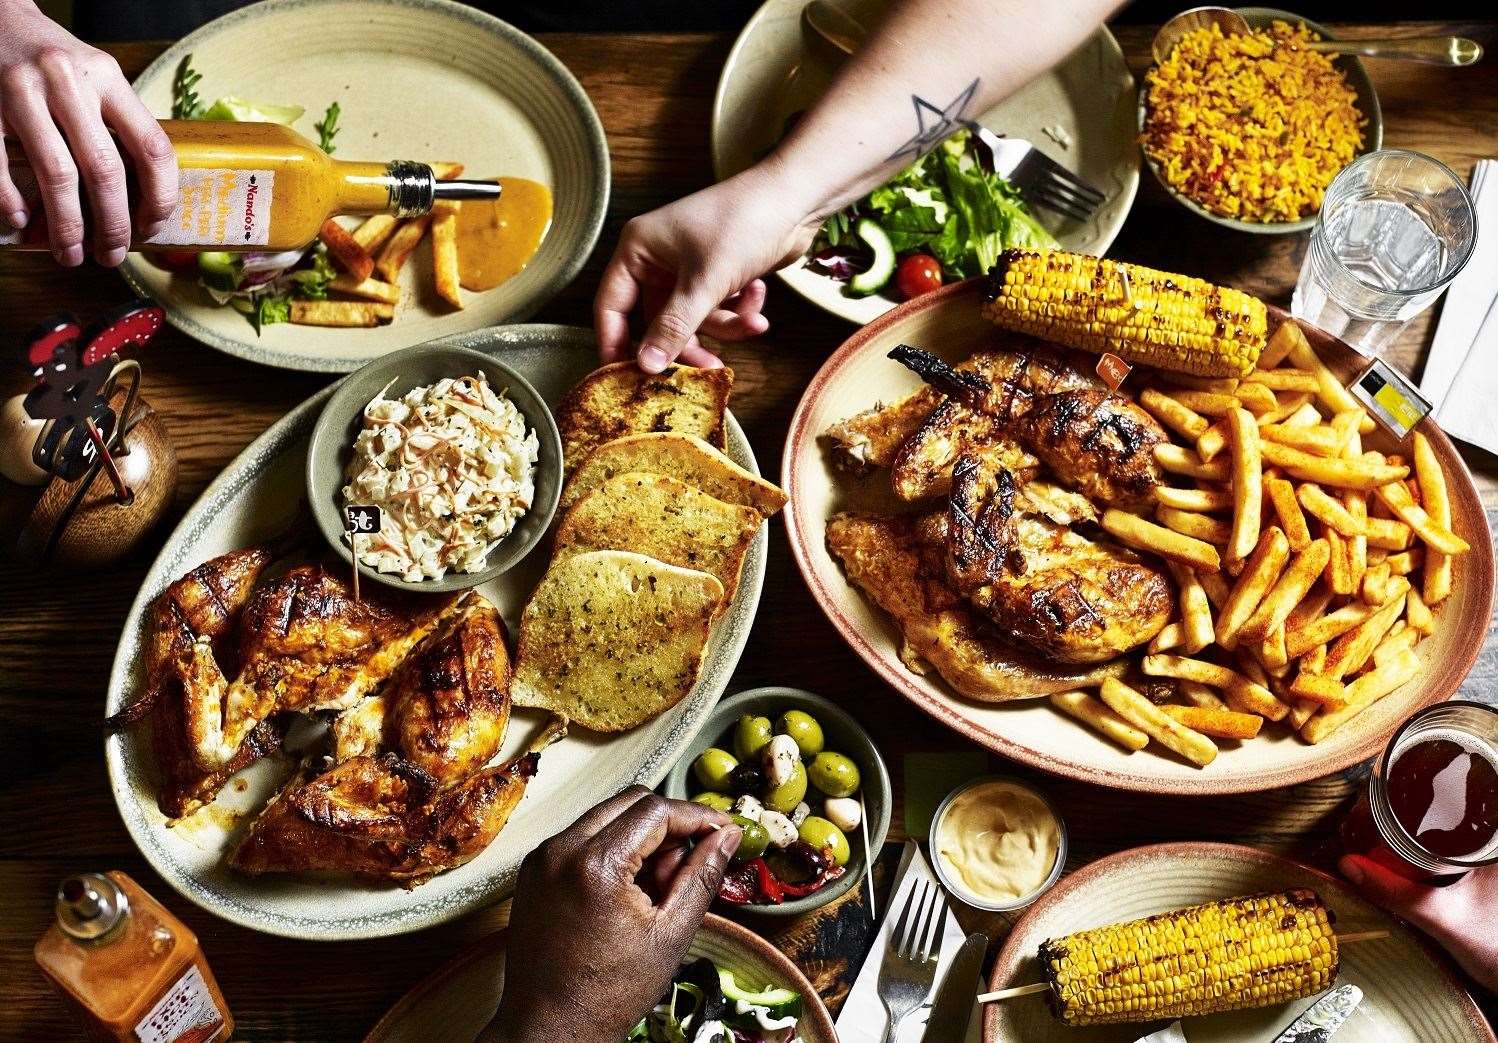 The opening date for Sittingbourne's Nando’s restaurant has been delayed